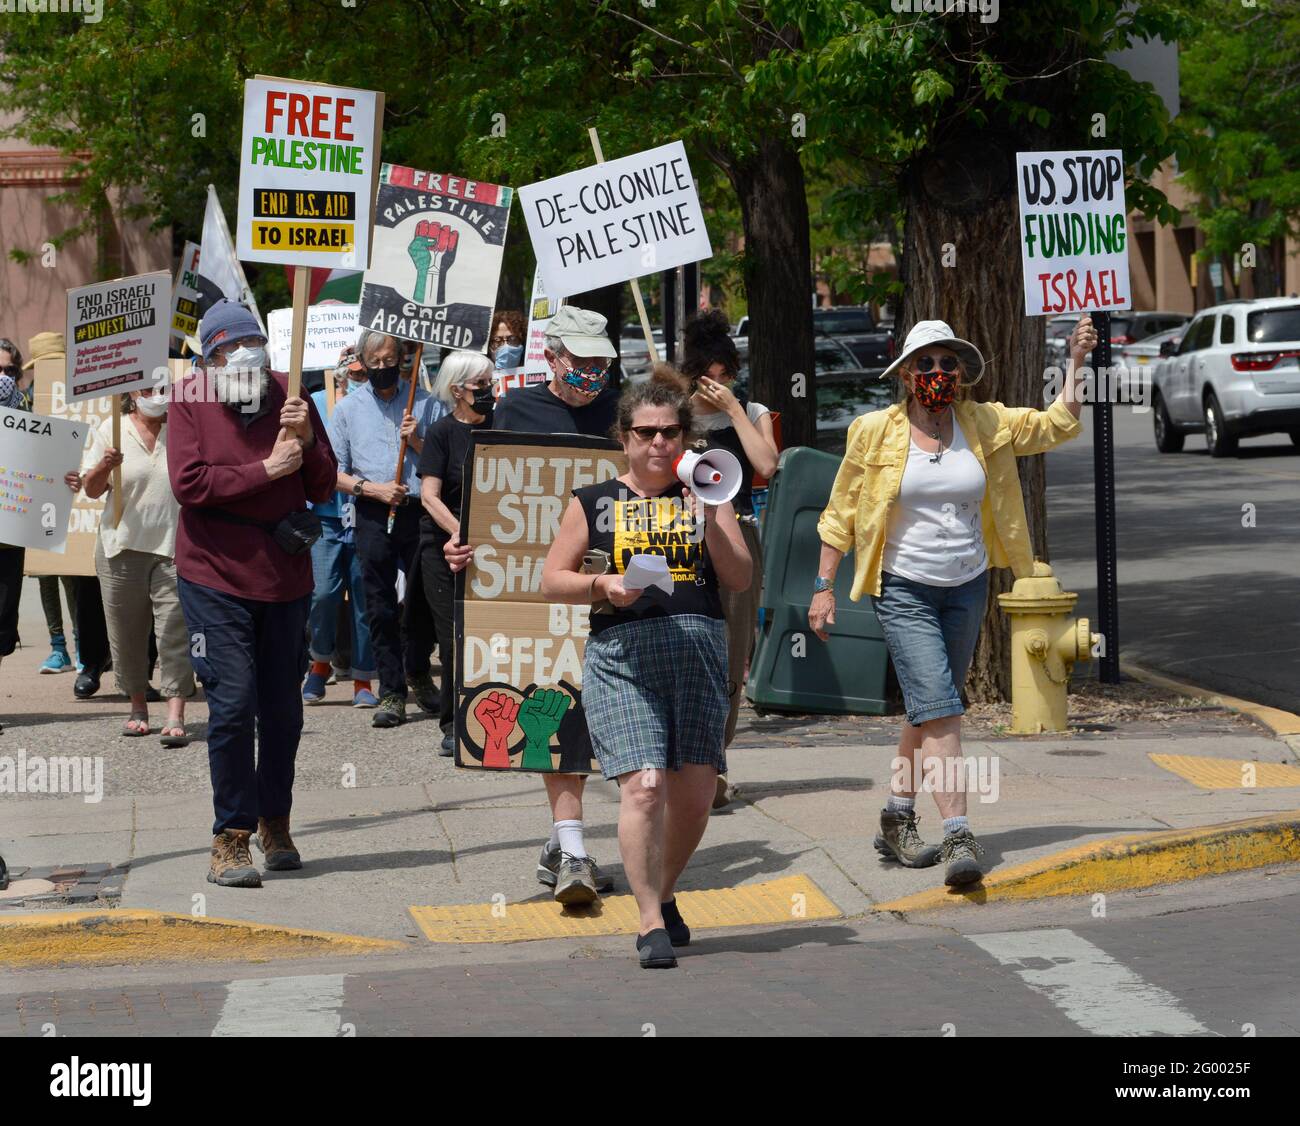 Activists sympathetic to the Palestinians and critical of Israel and the United States government demonstrate in Santa Fe, New Mexico. Stock Photo